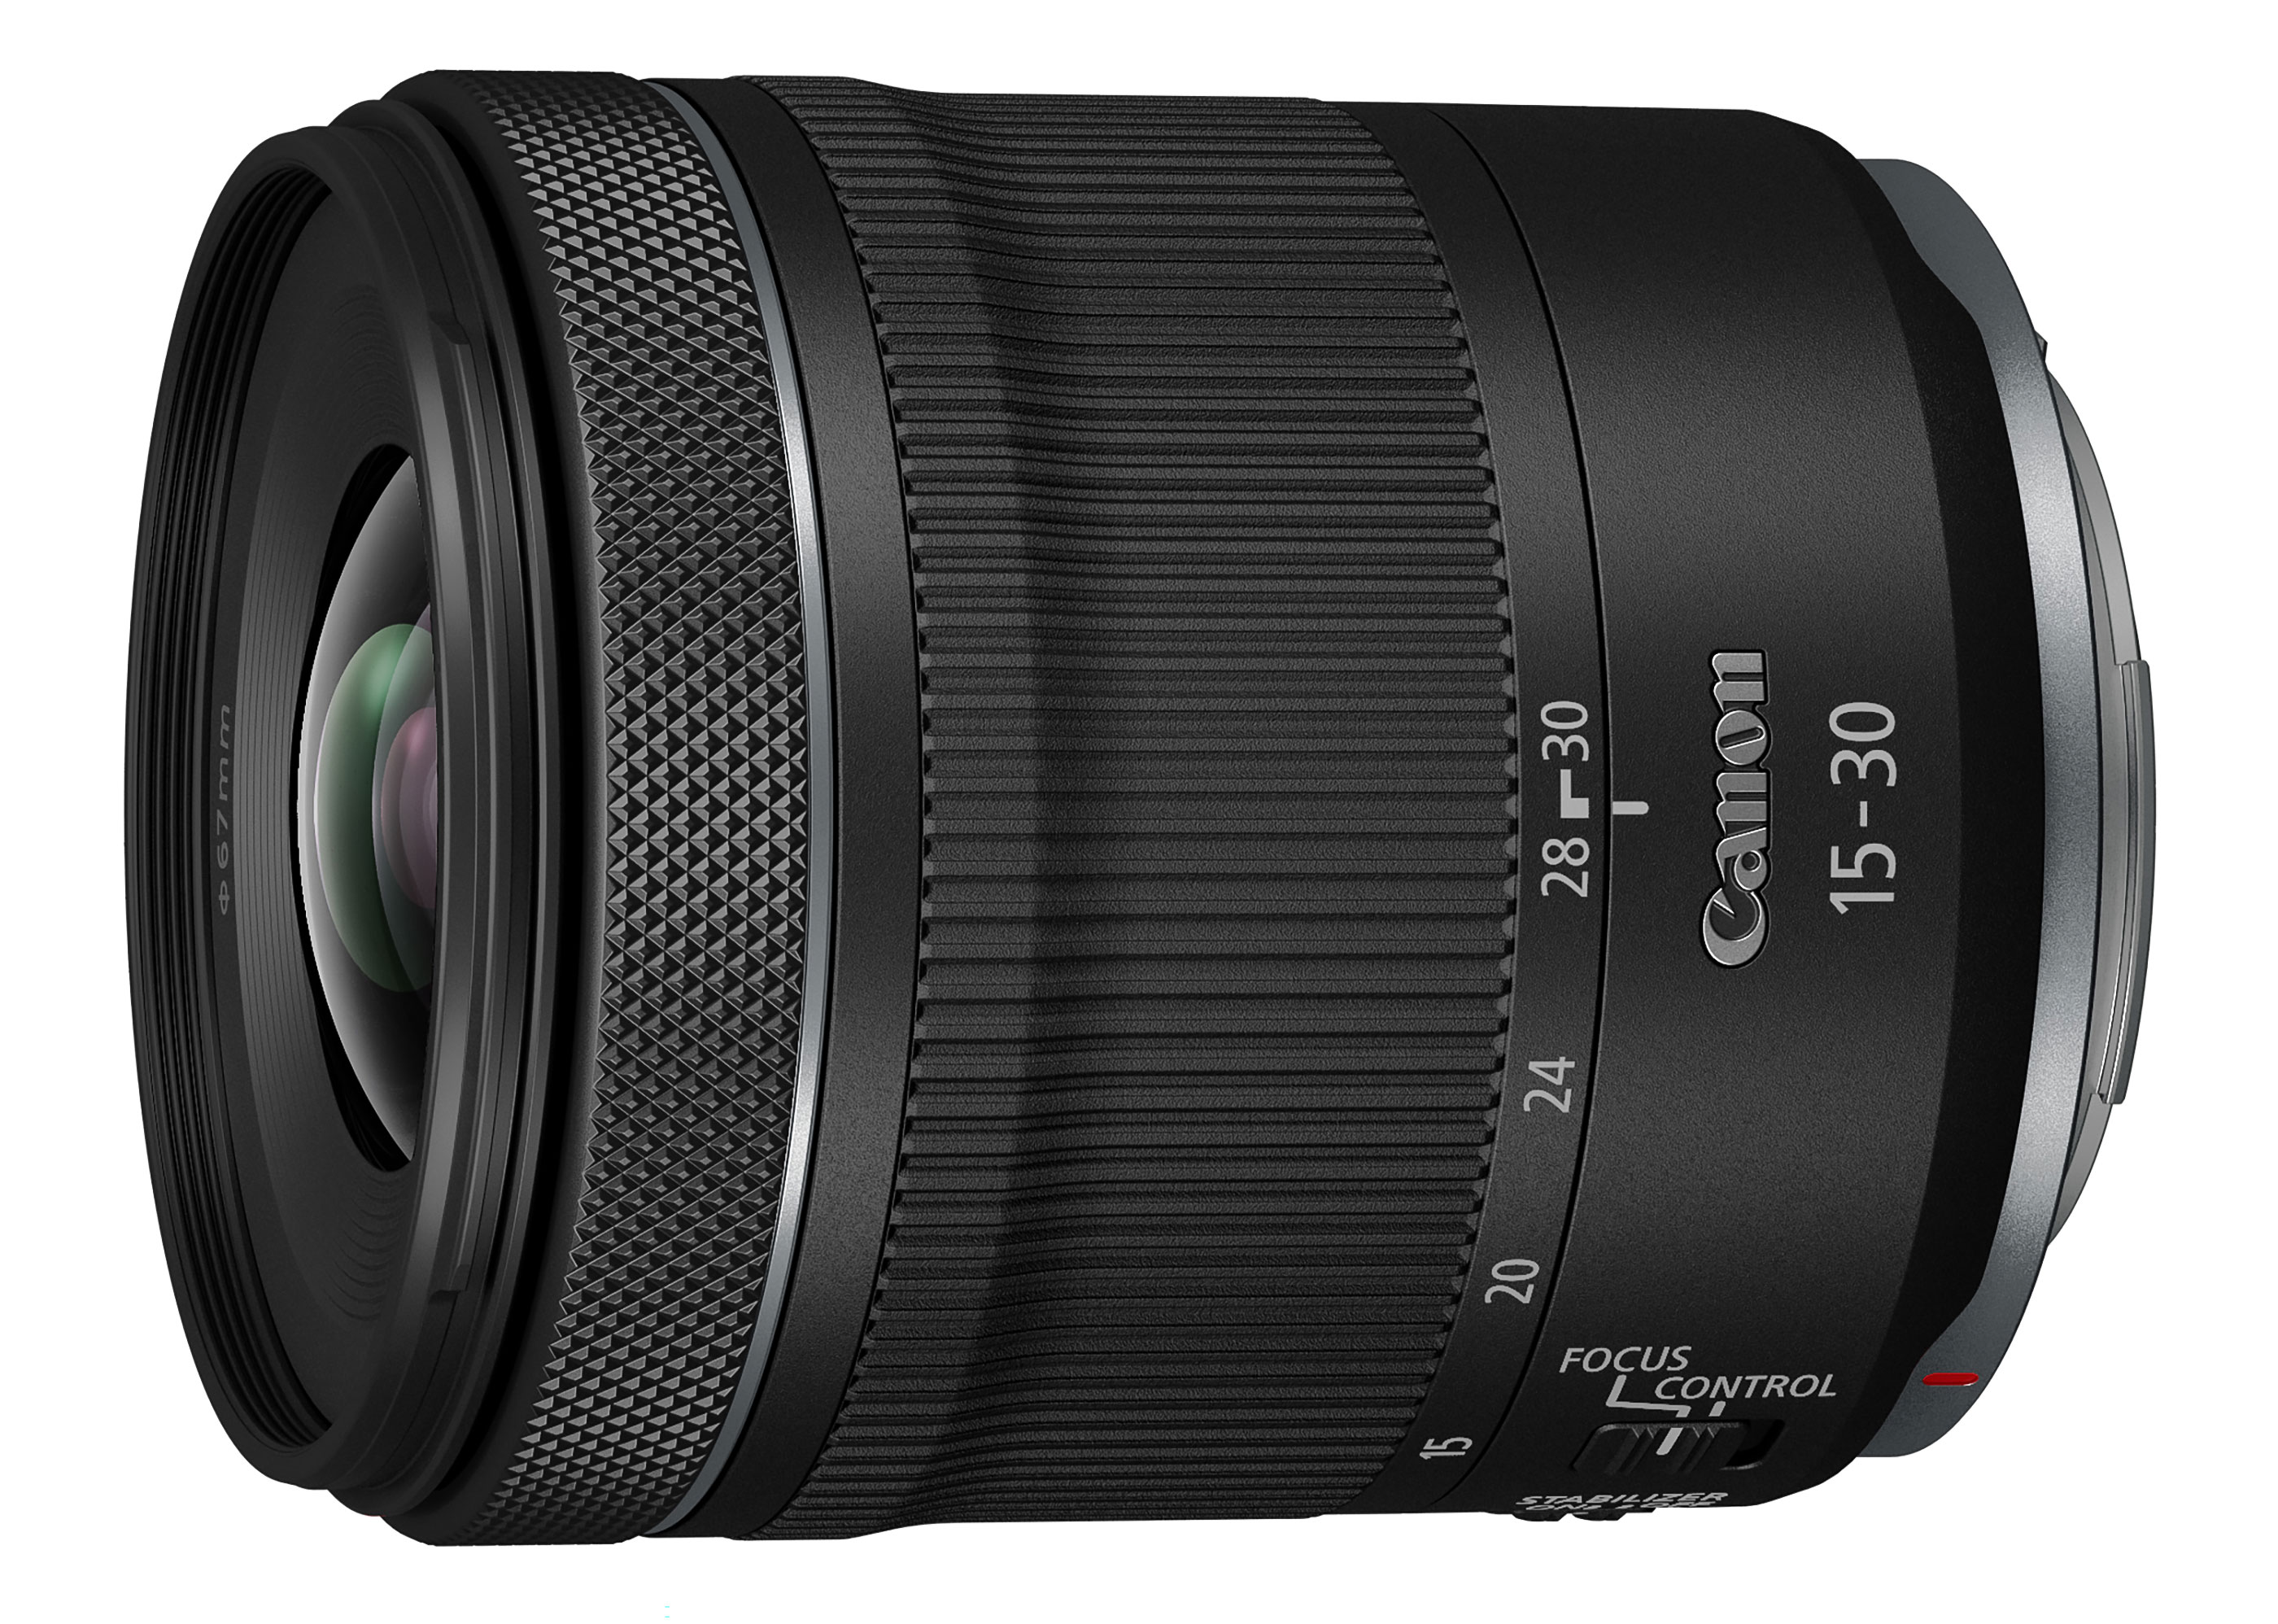 Canon RF 15-30mm f/4.5-6.3 IS STM